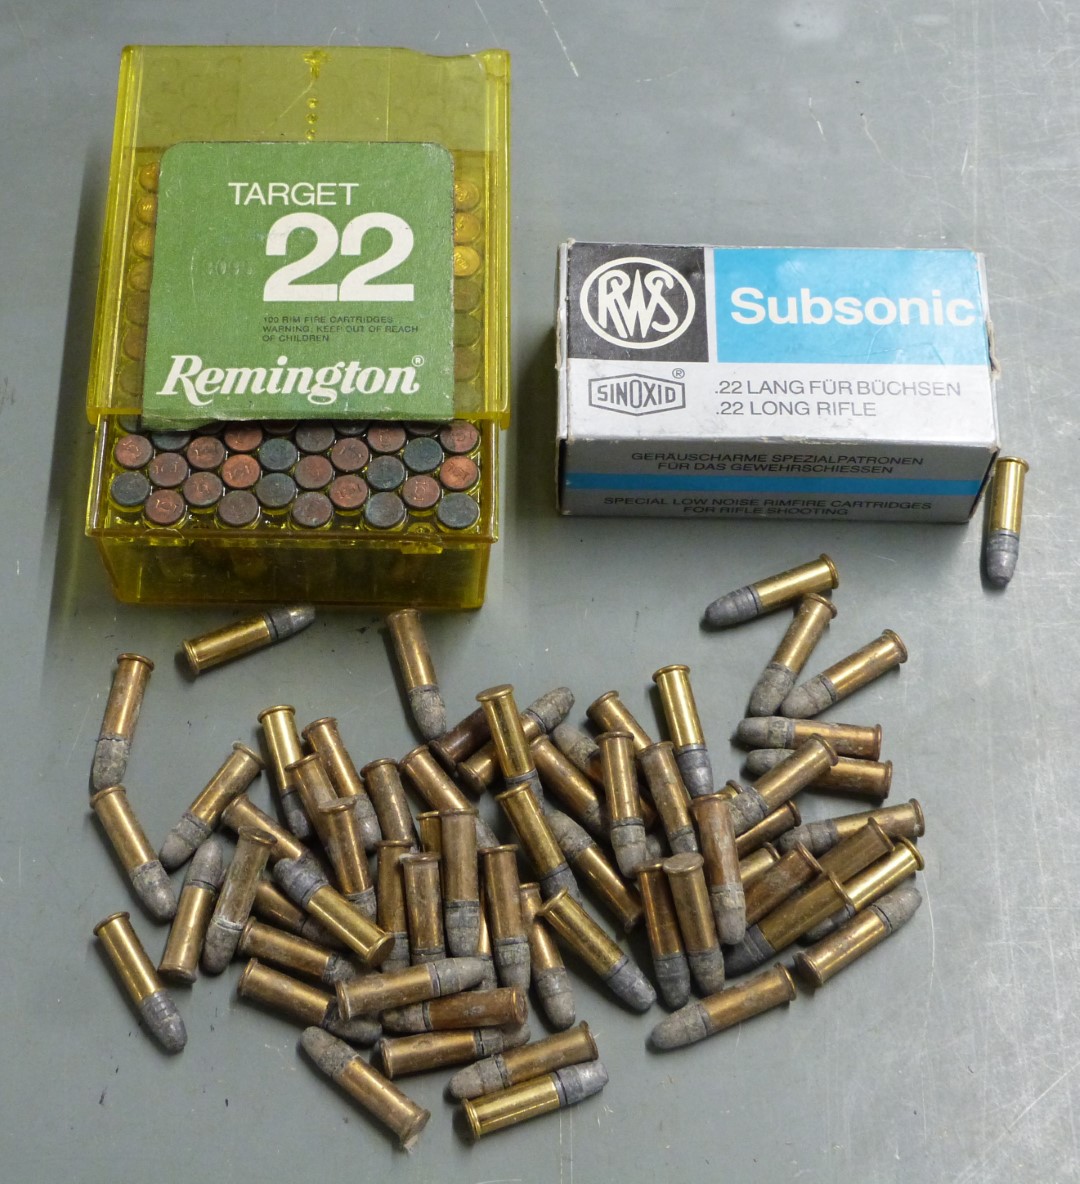 One-hundred-and-seventy-four .22 rifle cartridges including Remington and RWS Subsonic, some in